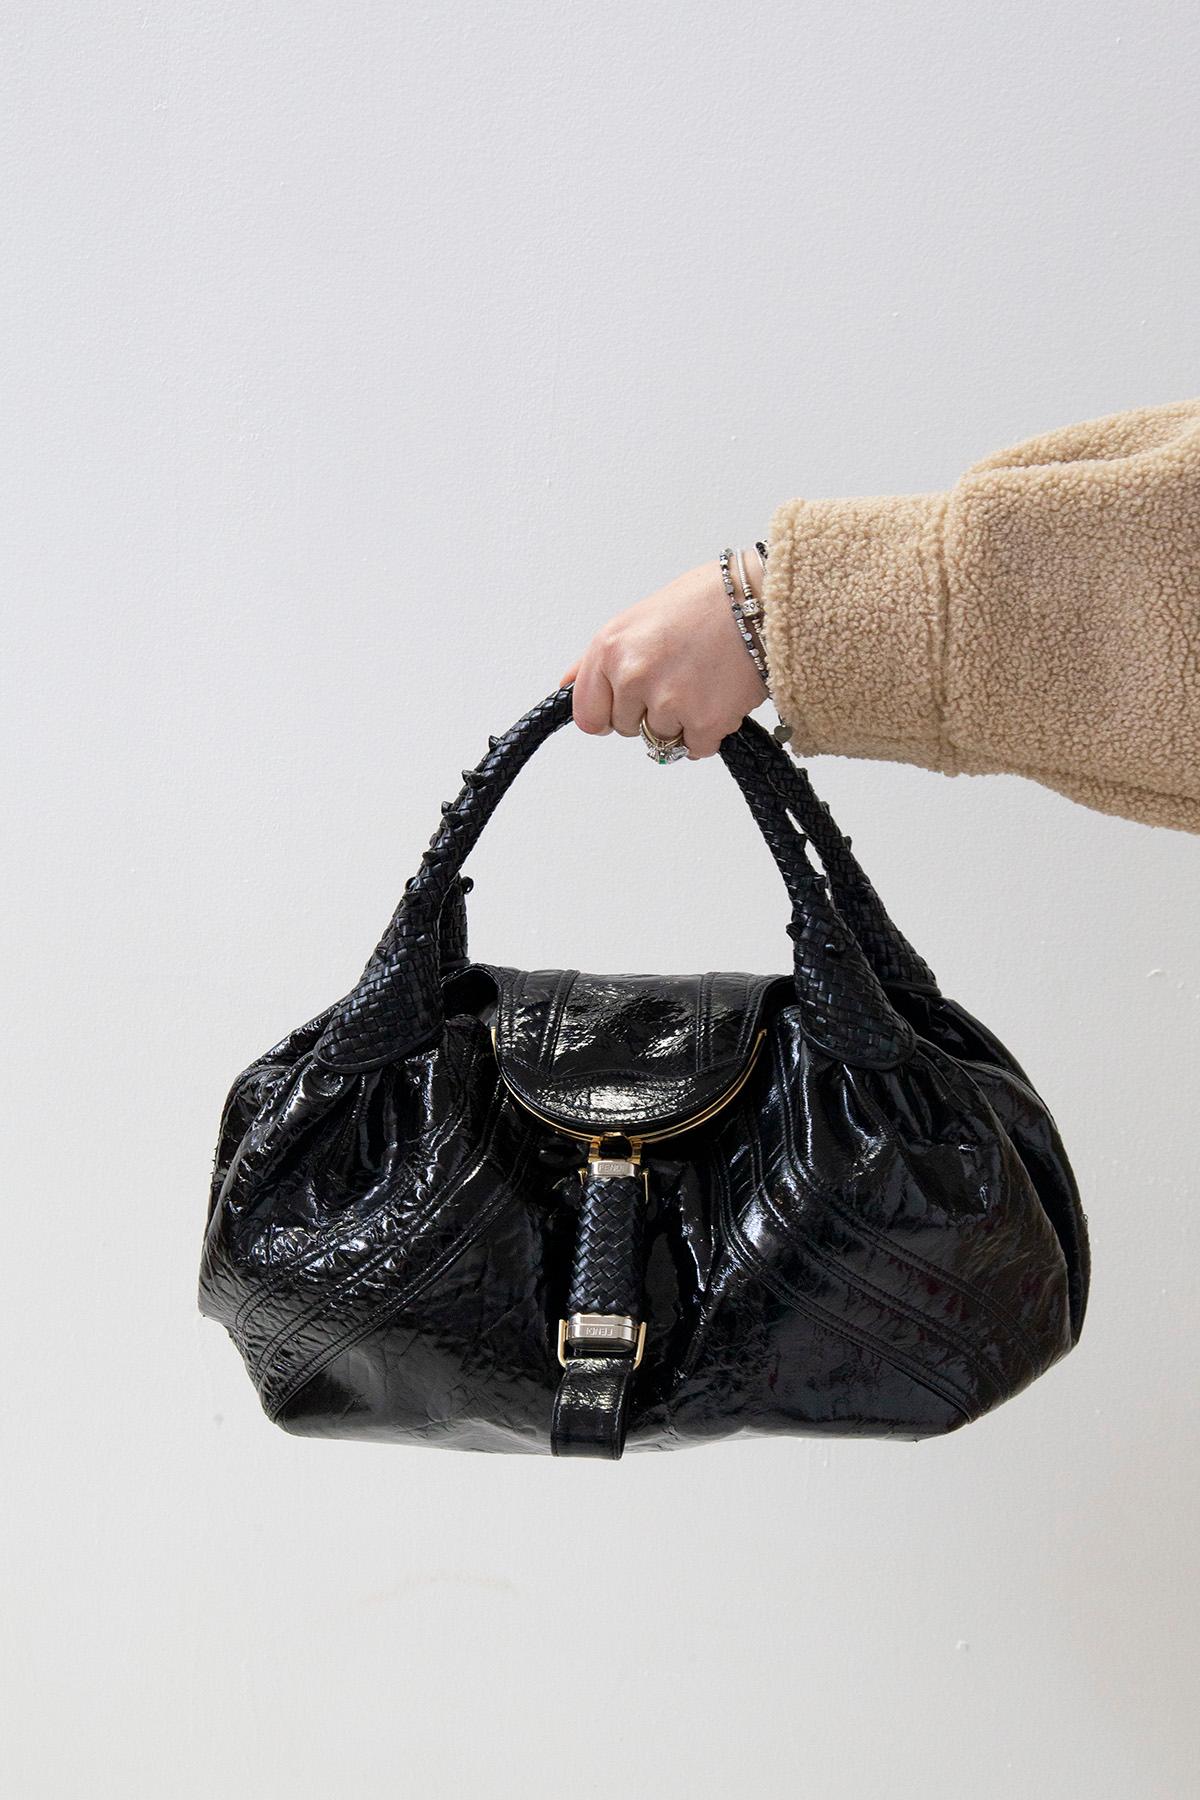 FENDI Black Shiny Leather Bag In Good Condition For Sale In Milano, IT